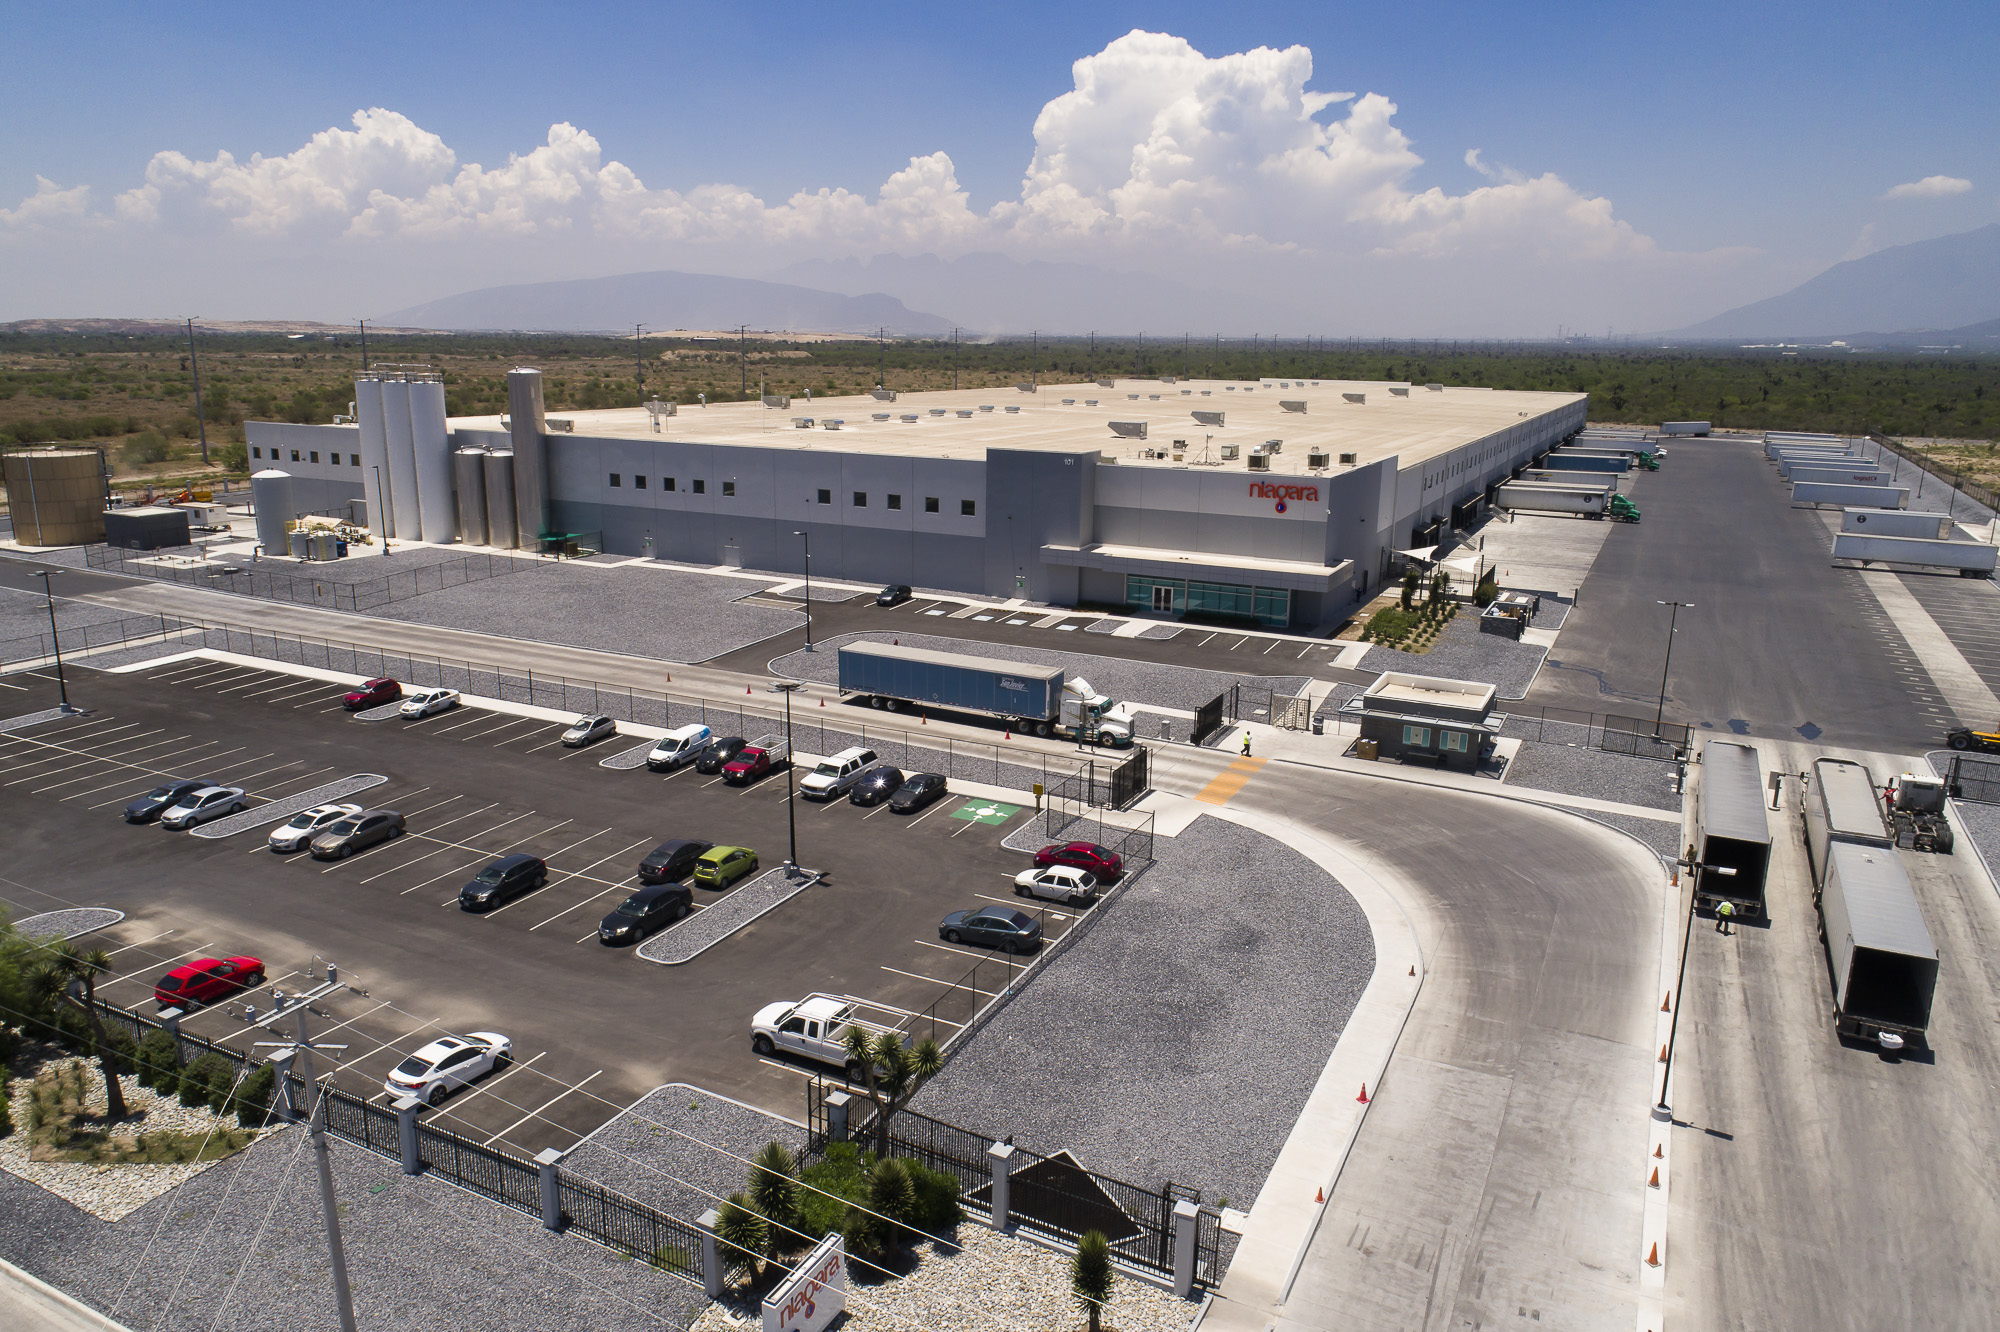 Meor inaugurates its first Class A complex in Tijuana